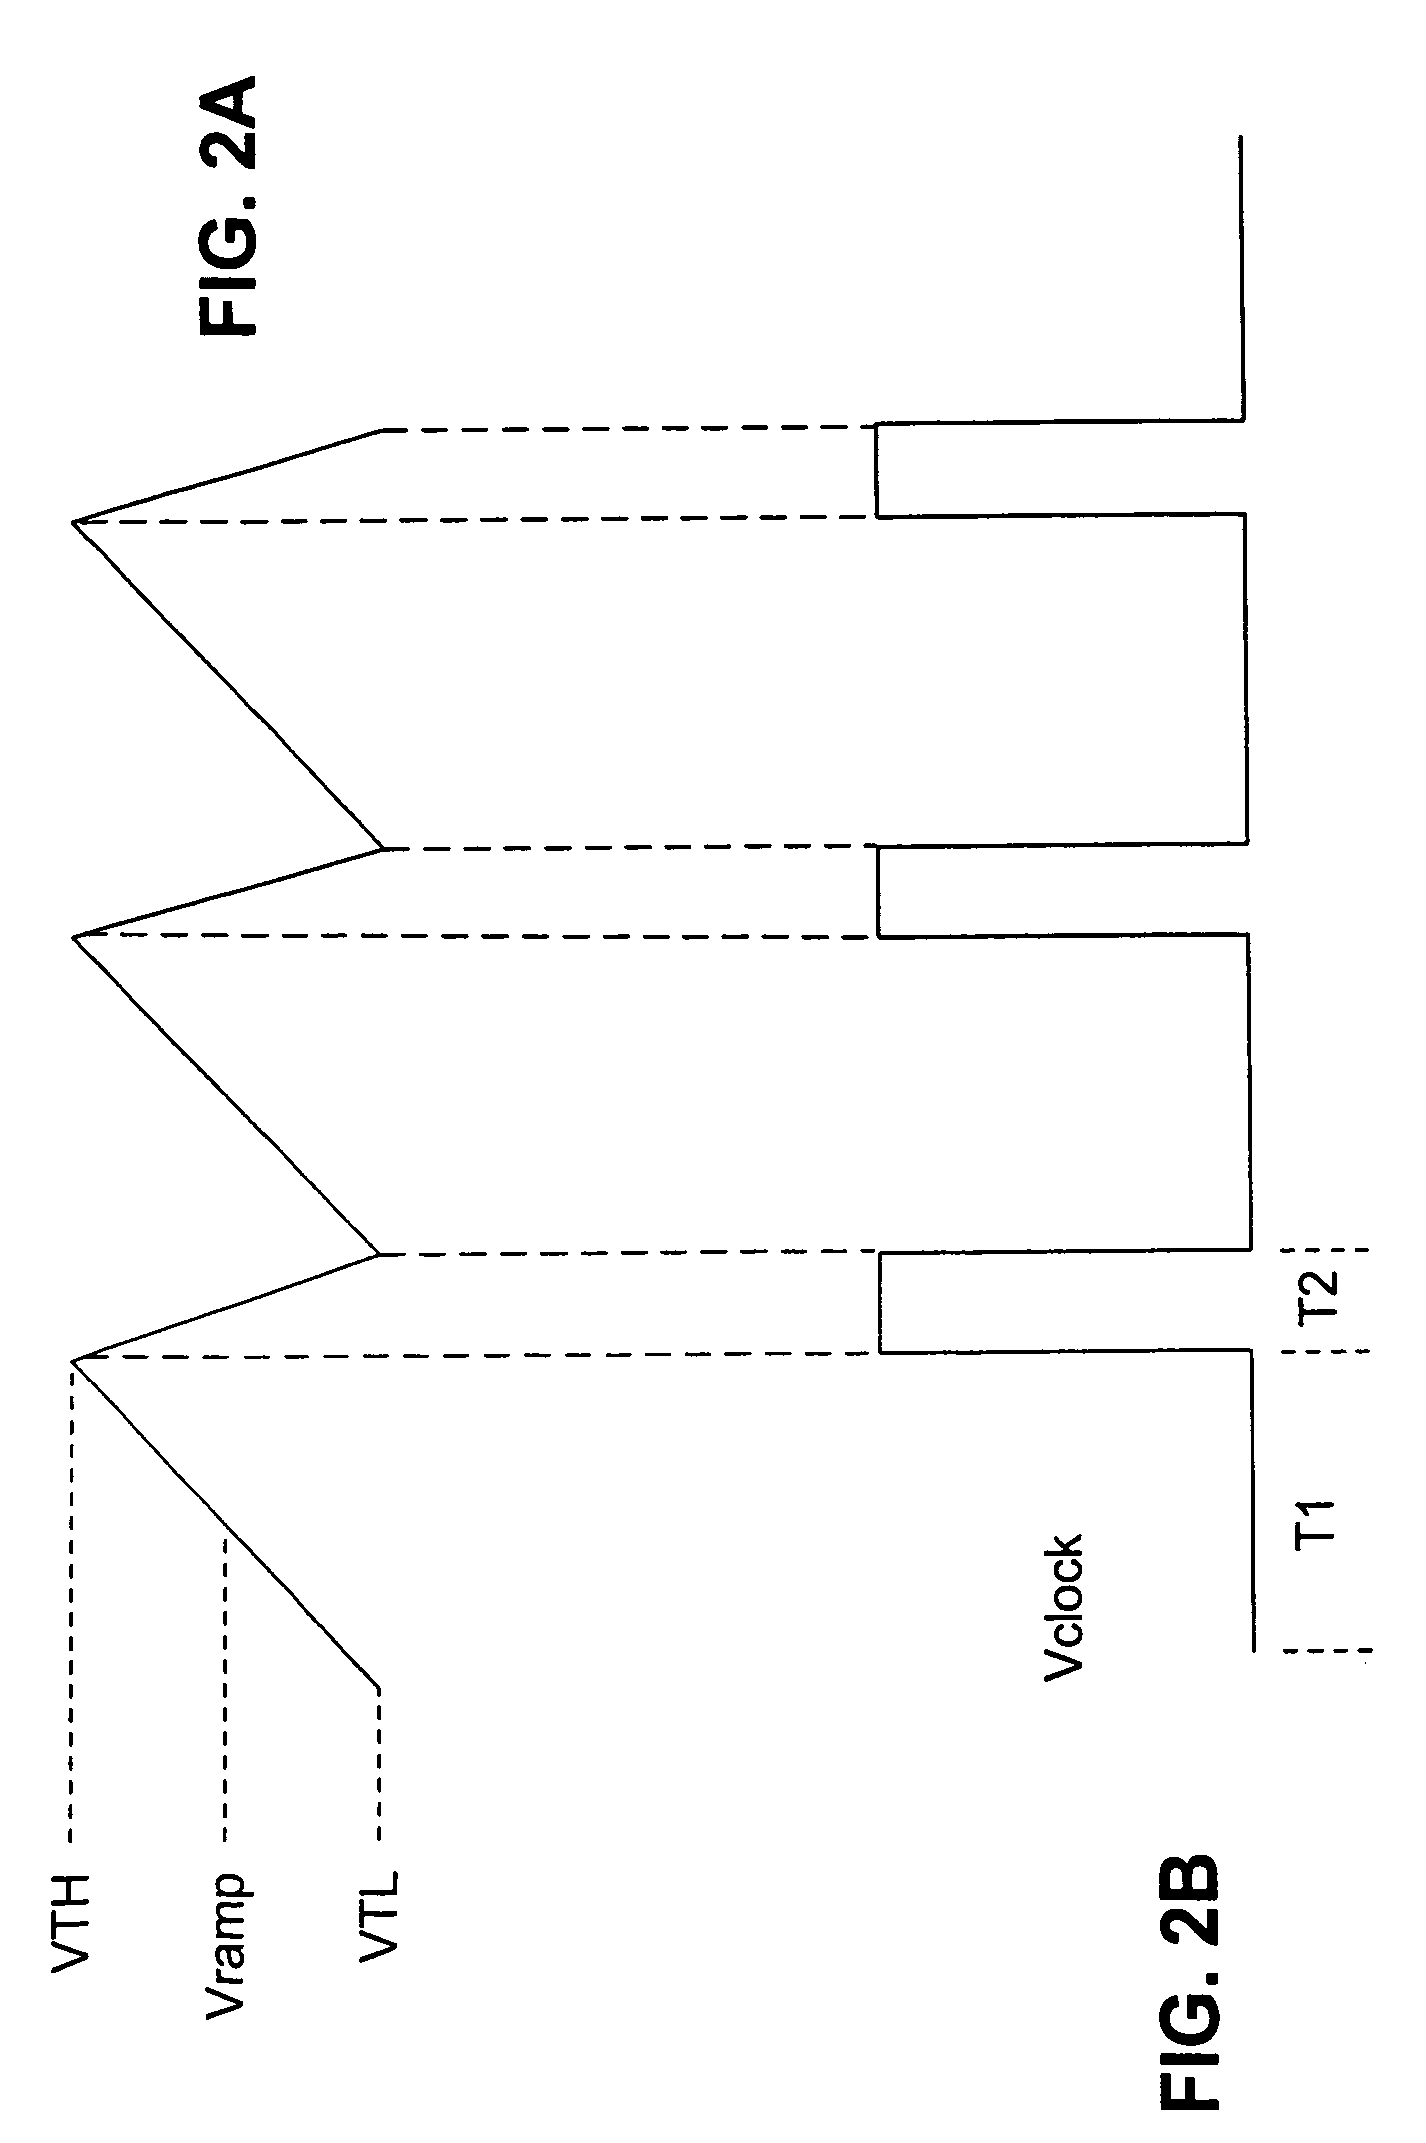 Switching regulator duty cycle control in a fixed frequency operation